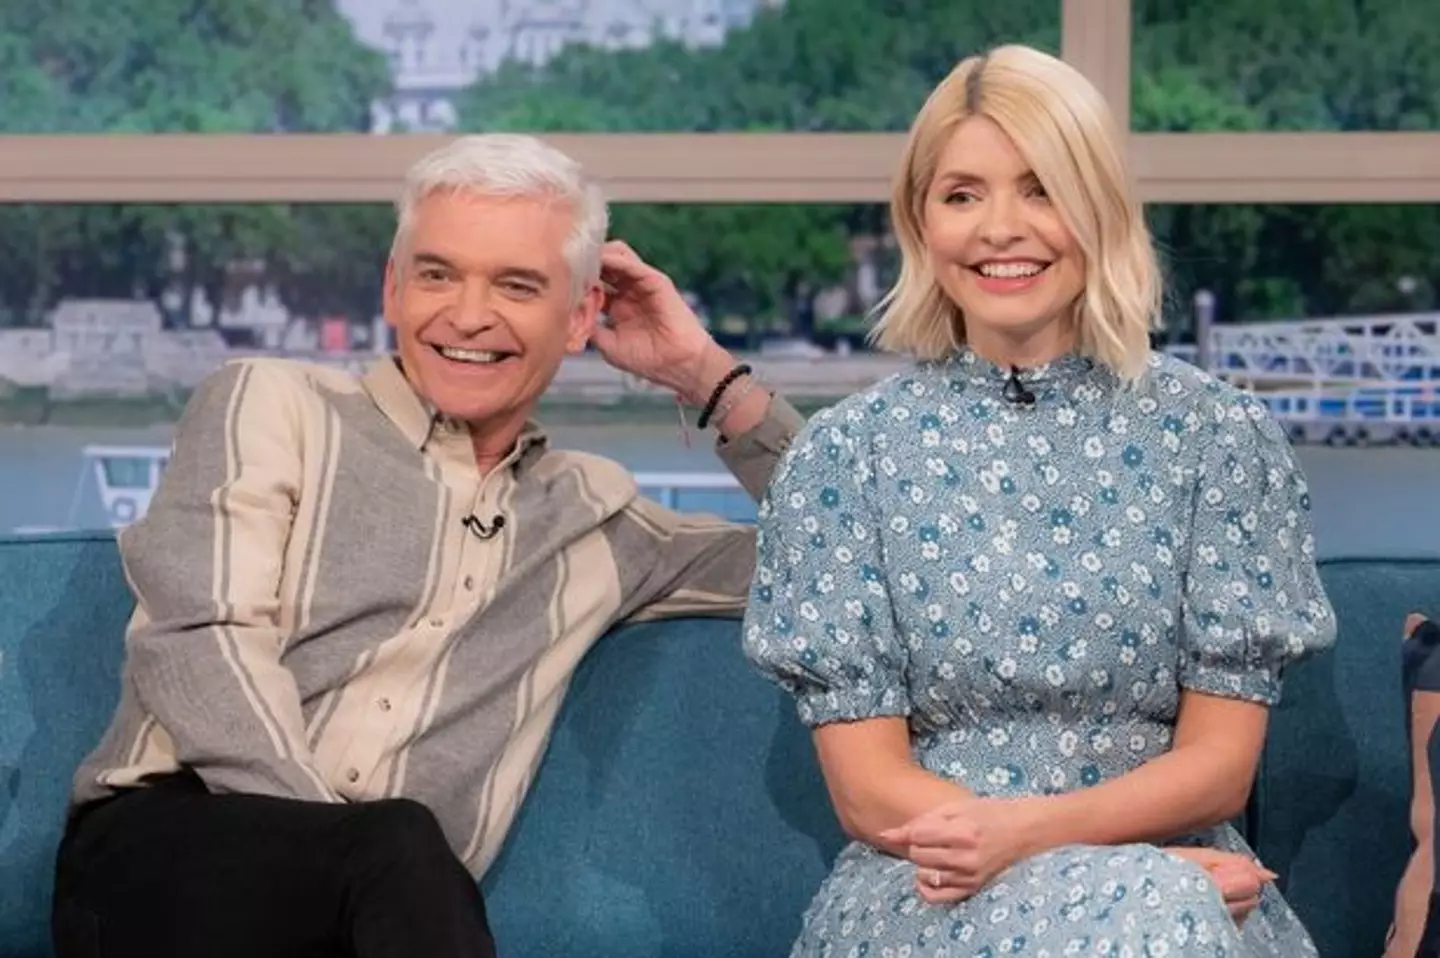 Holly Willoughby has spoken out following the news of Phillip Schofield's affair.